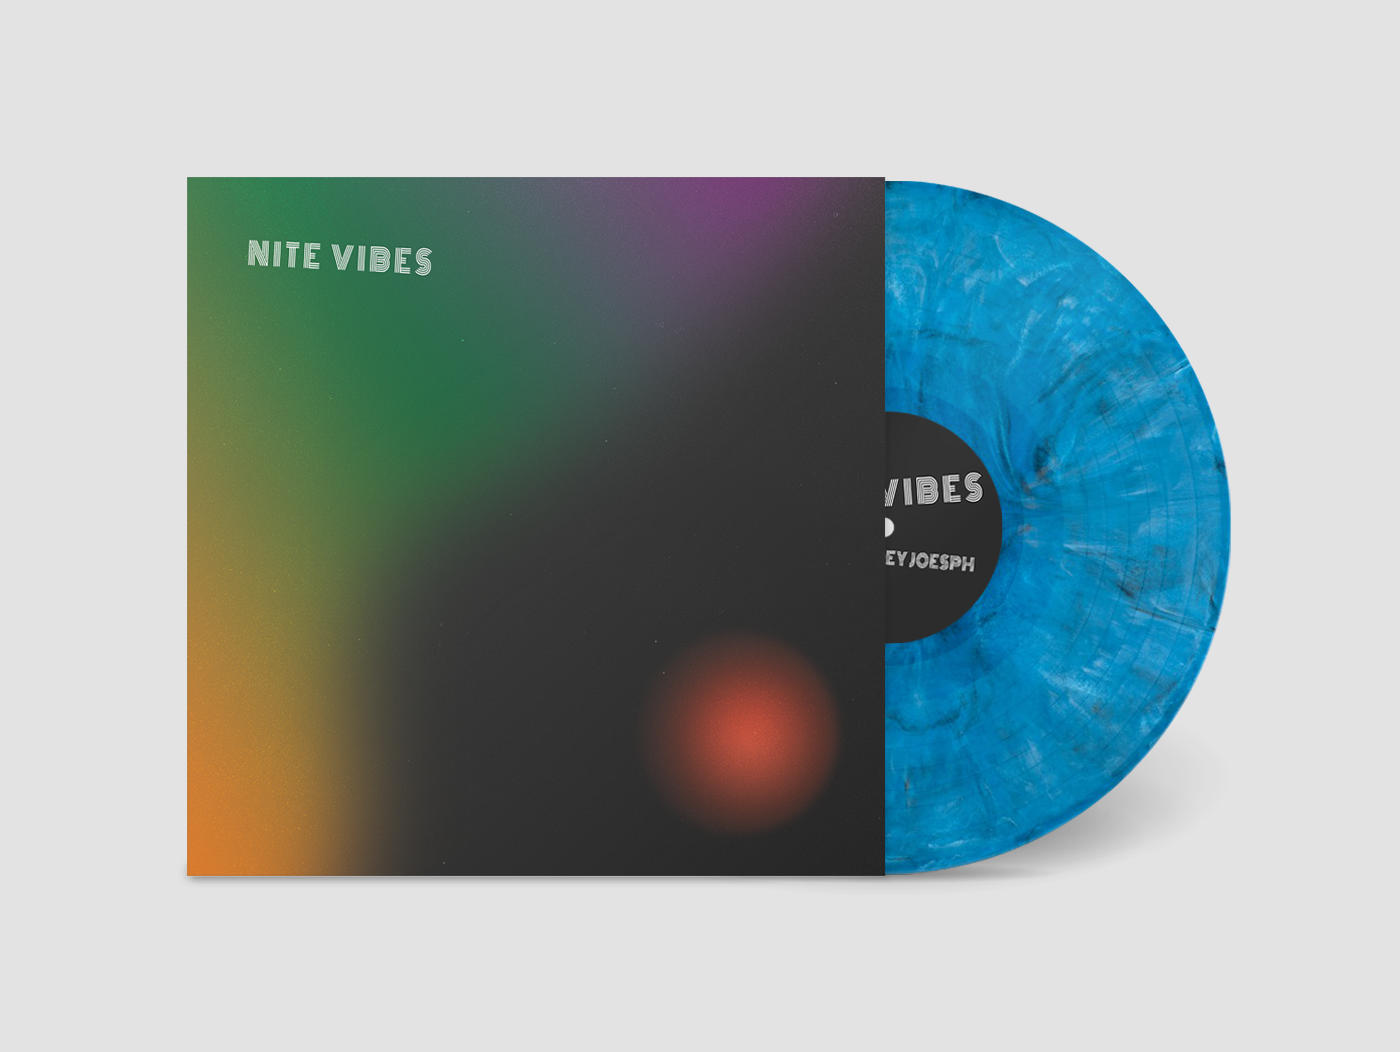 Joey Joesph’s “Nite Vibes” available for pre-order!